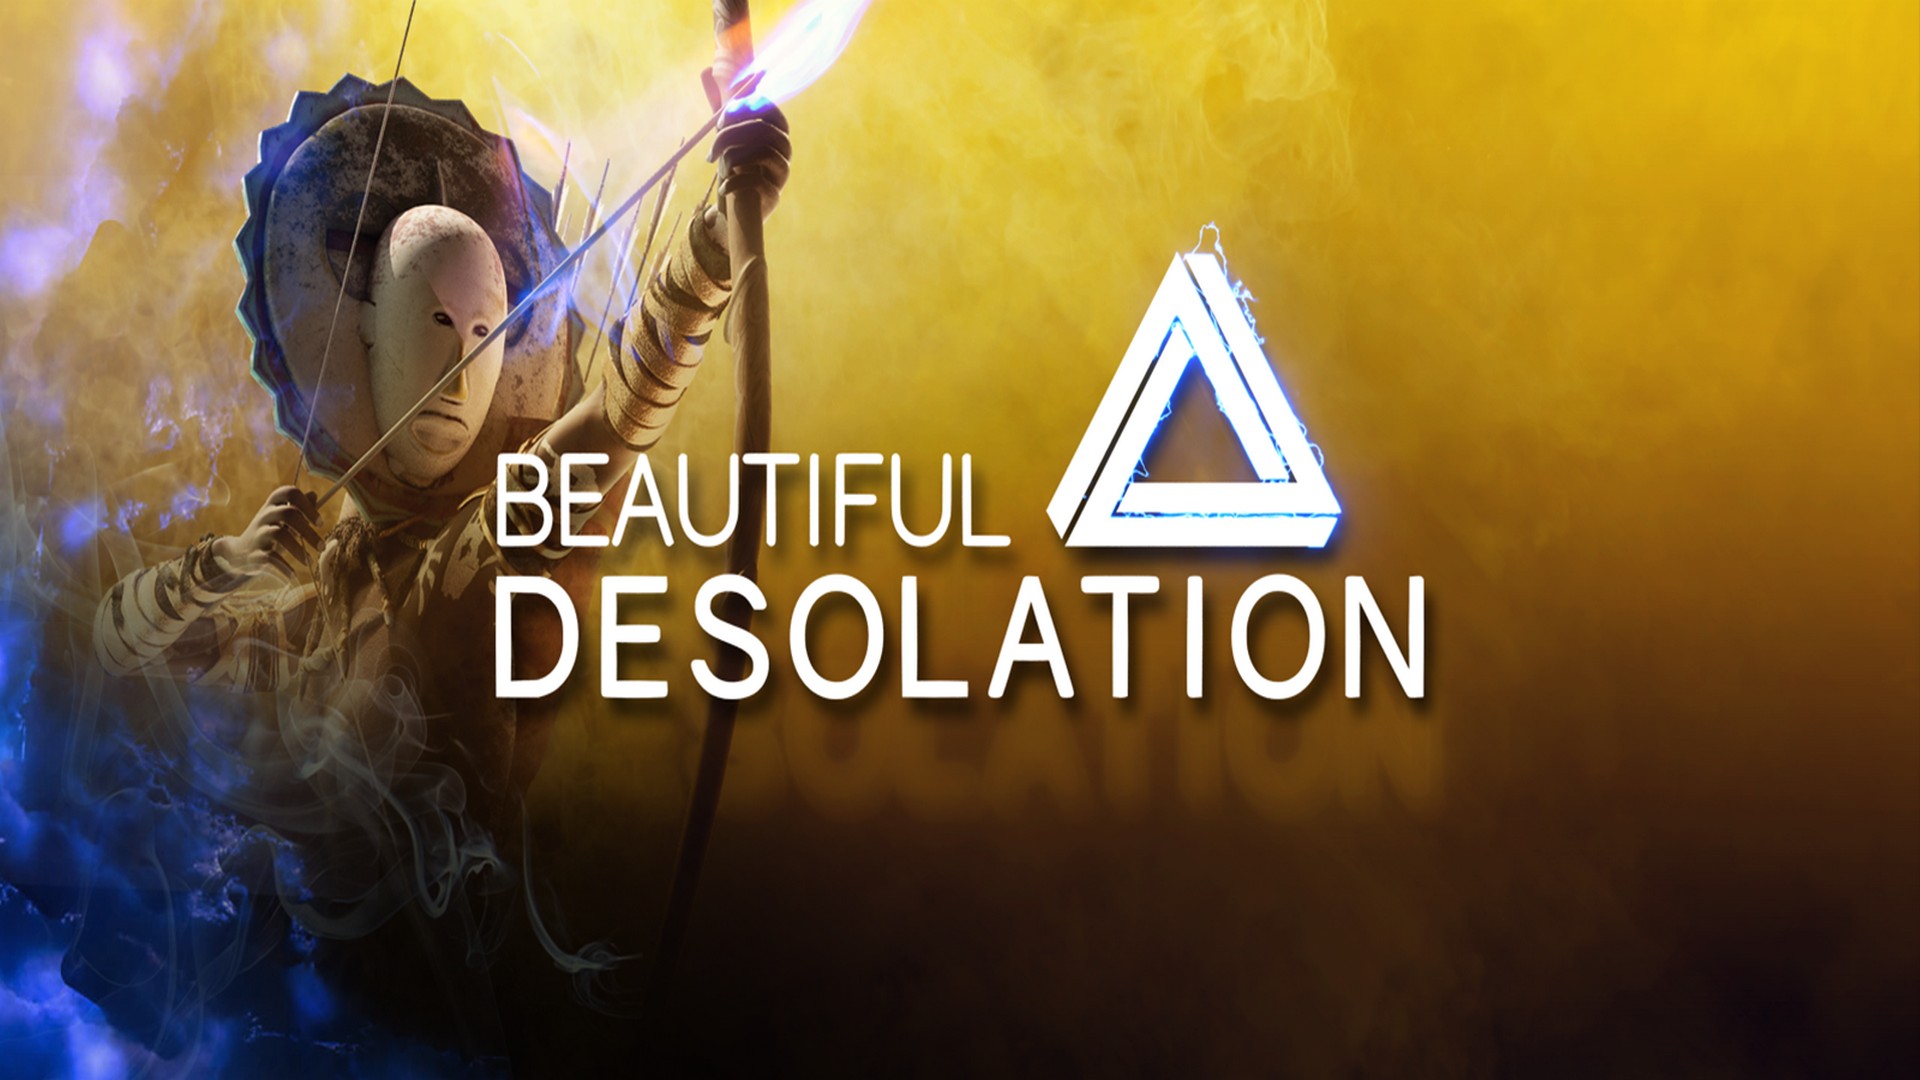 Beautiful Desolation Adds Mick Gordon OST and Digital Artbook To Console Versions